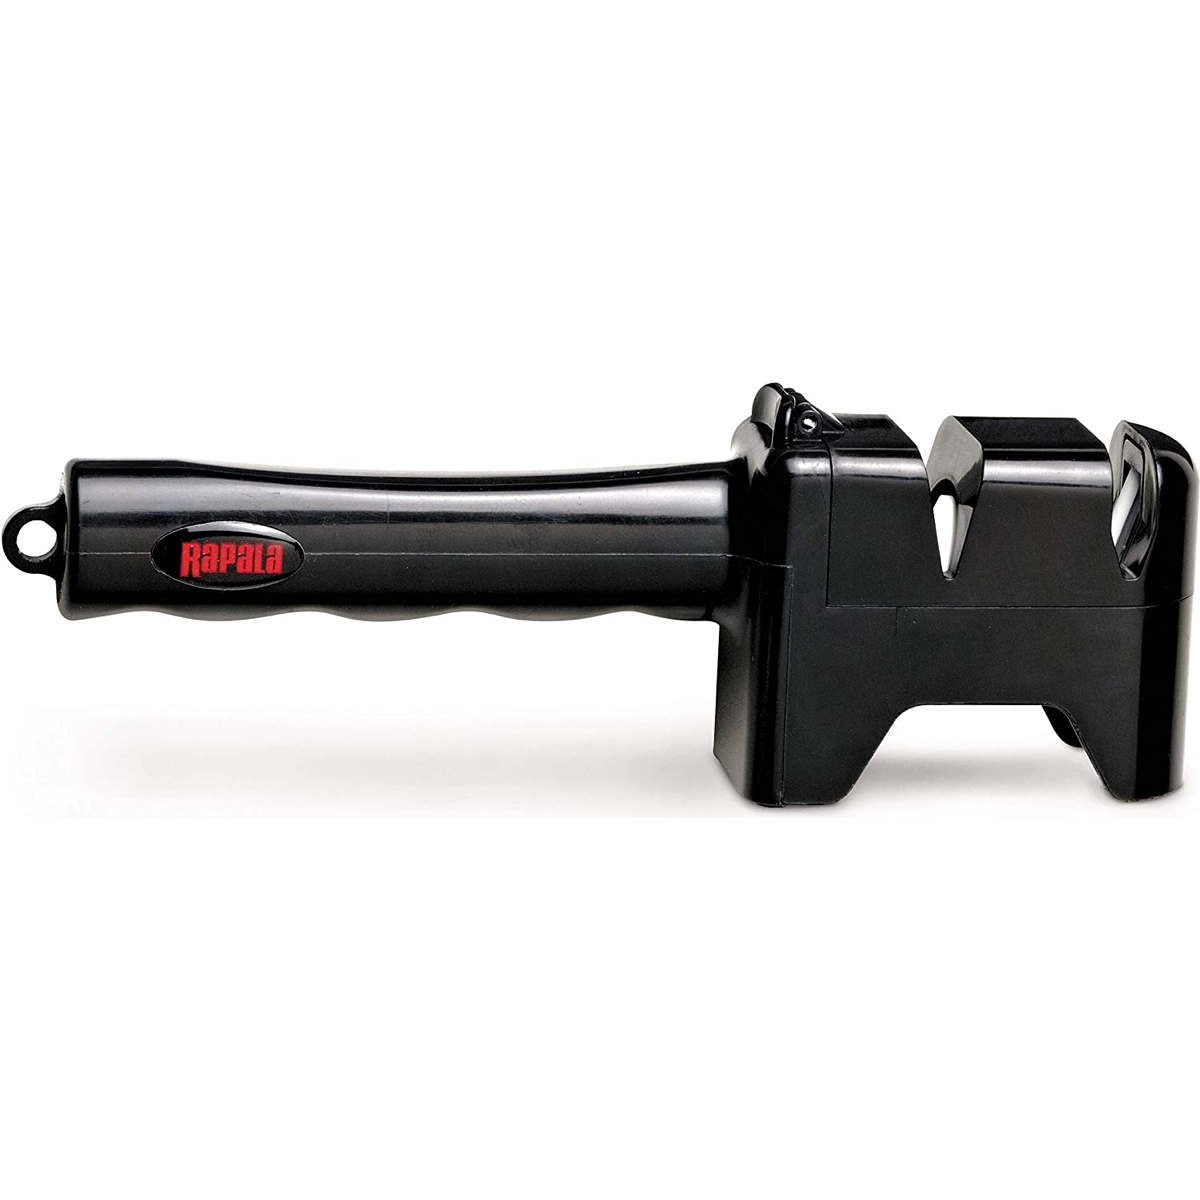 Photo of Rapala Ceramic Two-Stage Knife Sharpener for sale at United Tackle Shops.